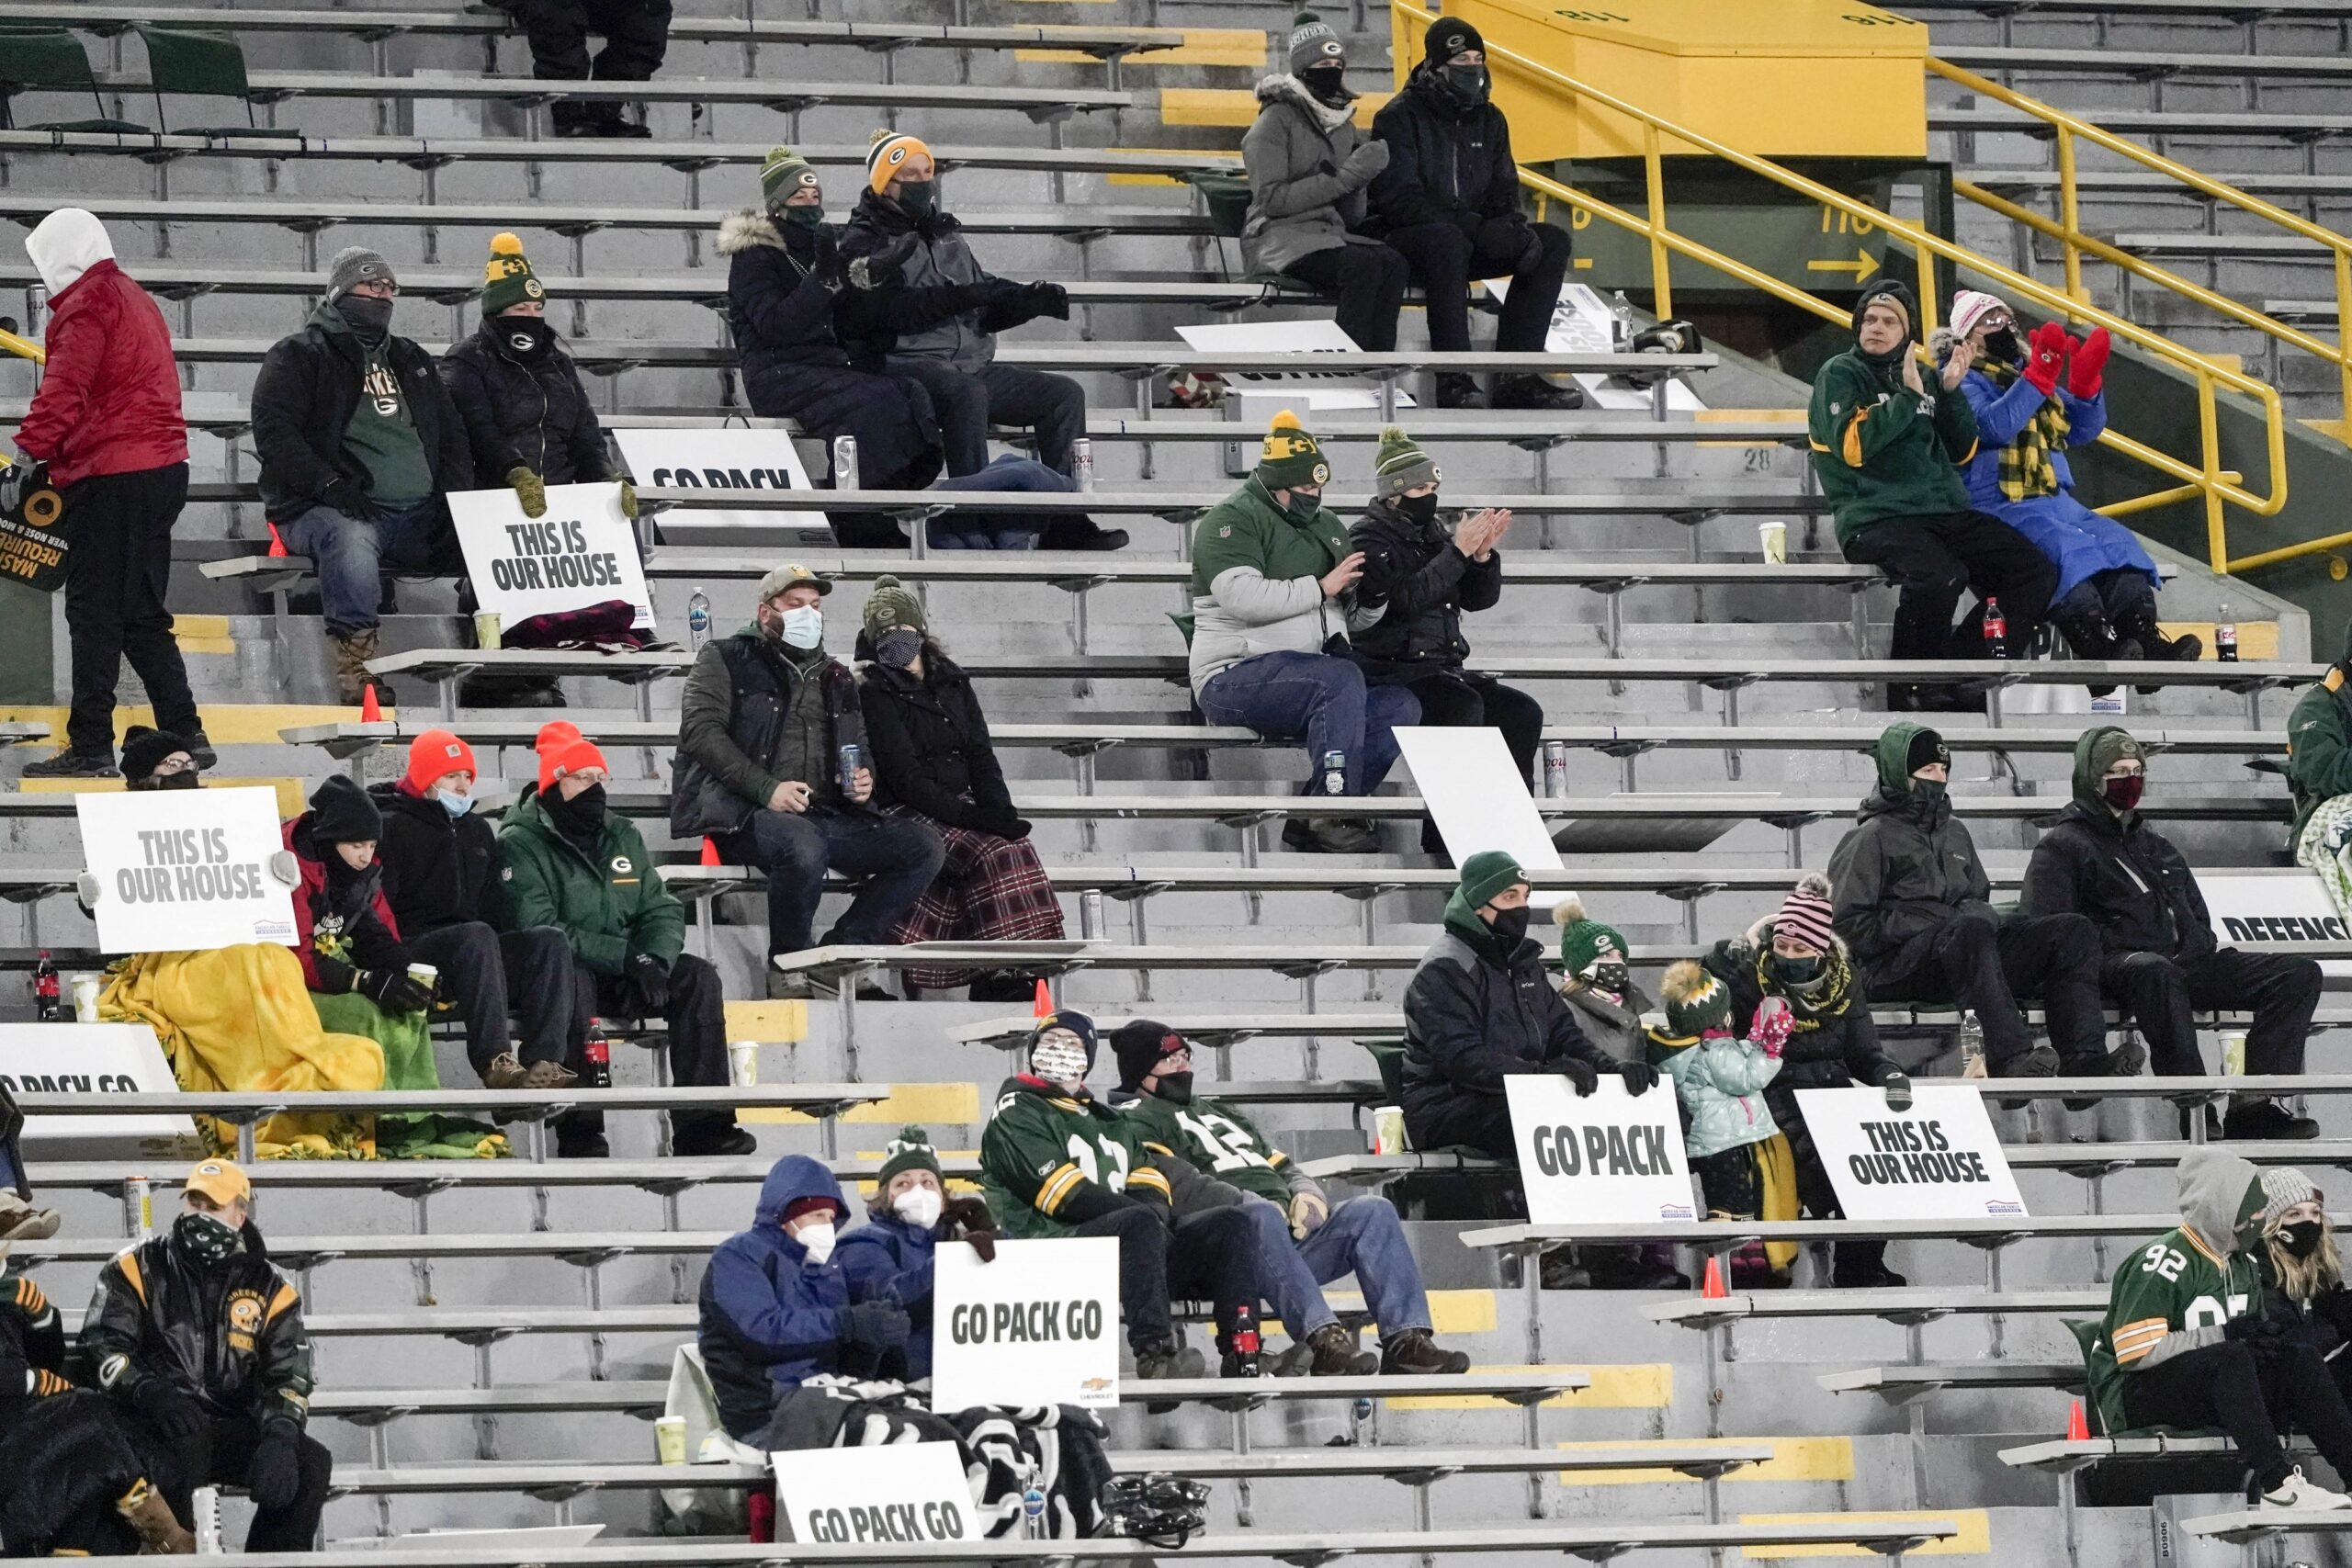 A limited number of fans at Lambeau Field watch a Green Bay Packers game